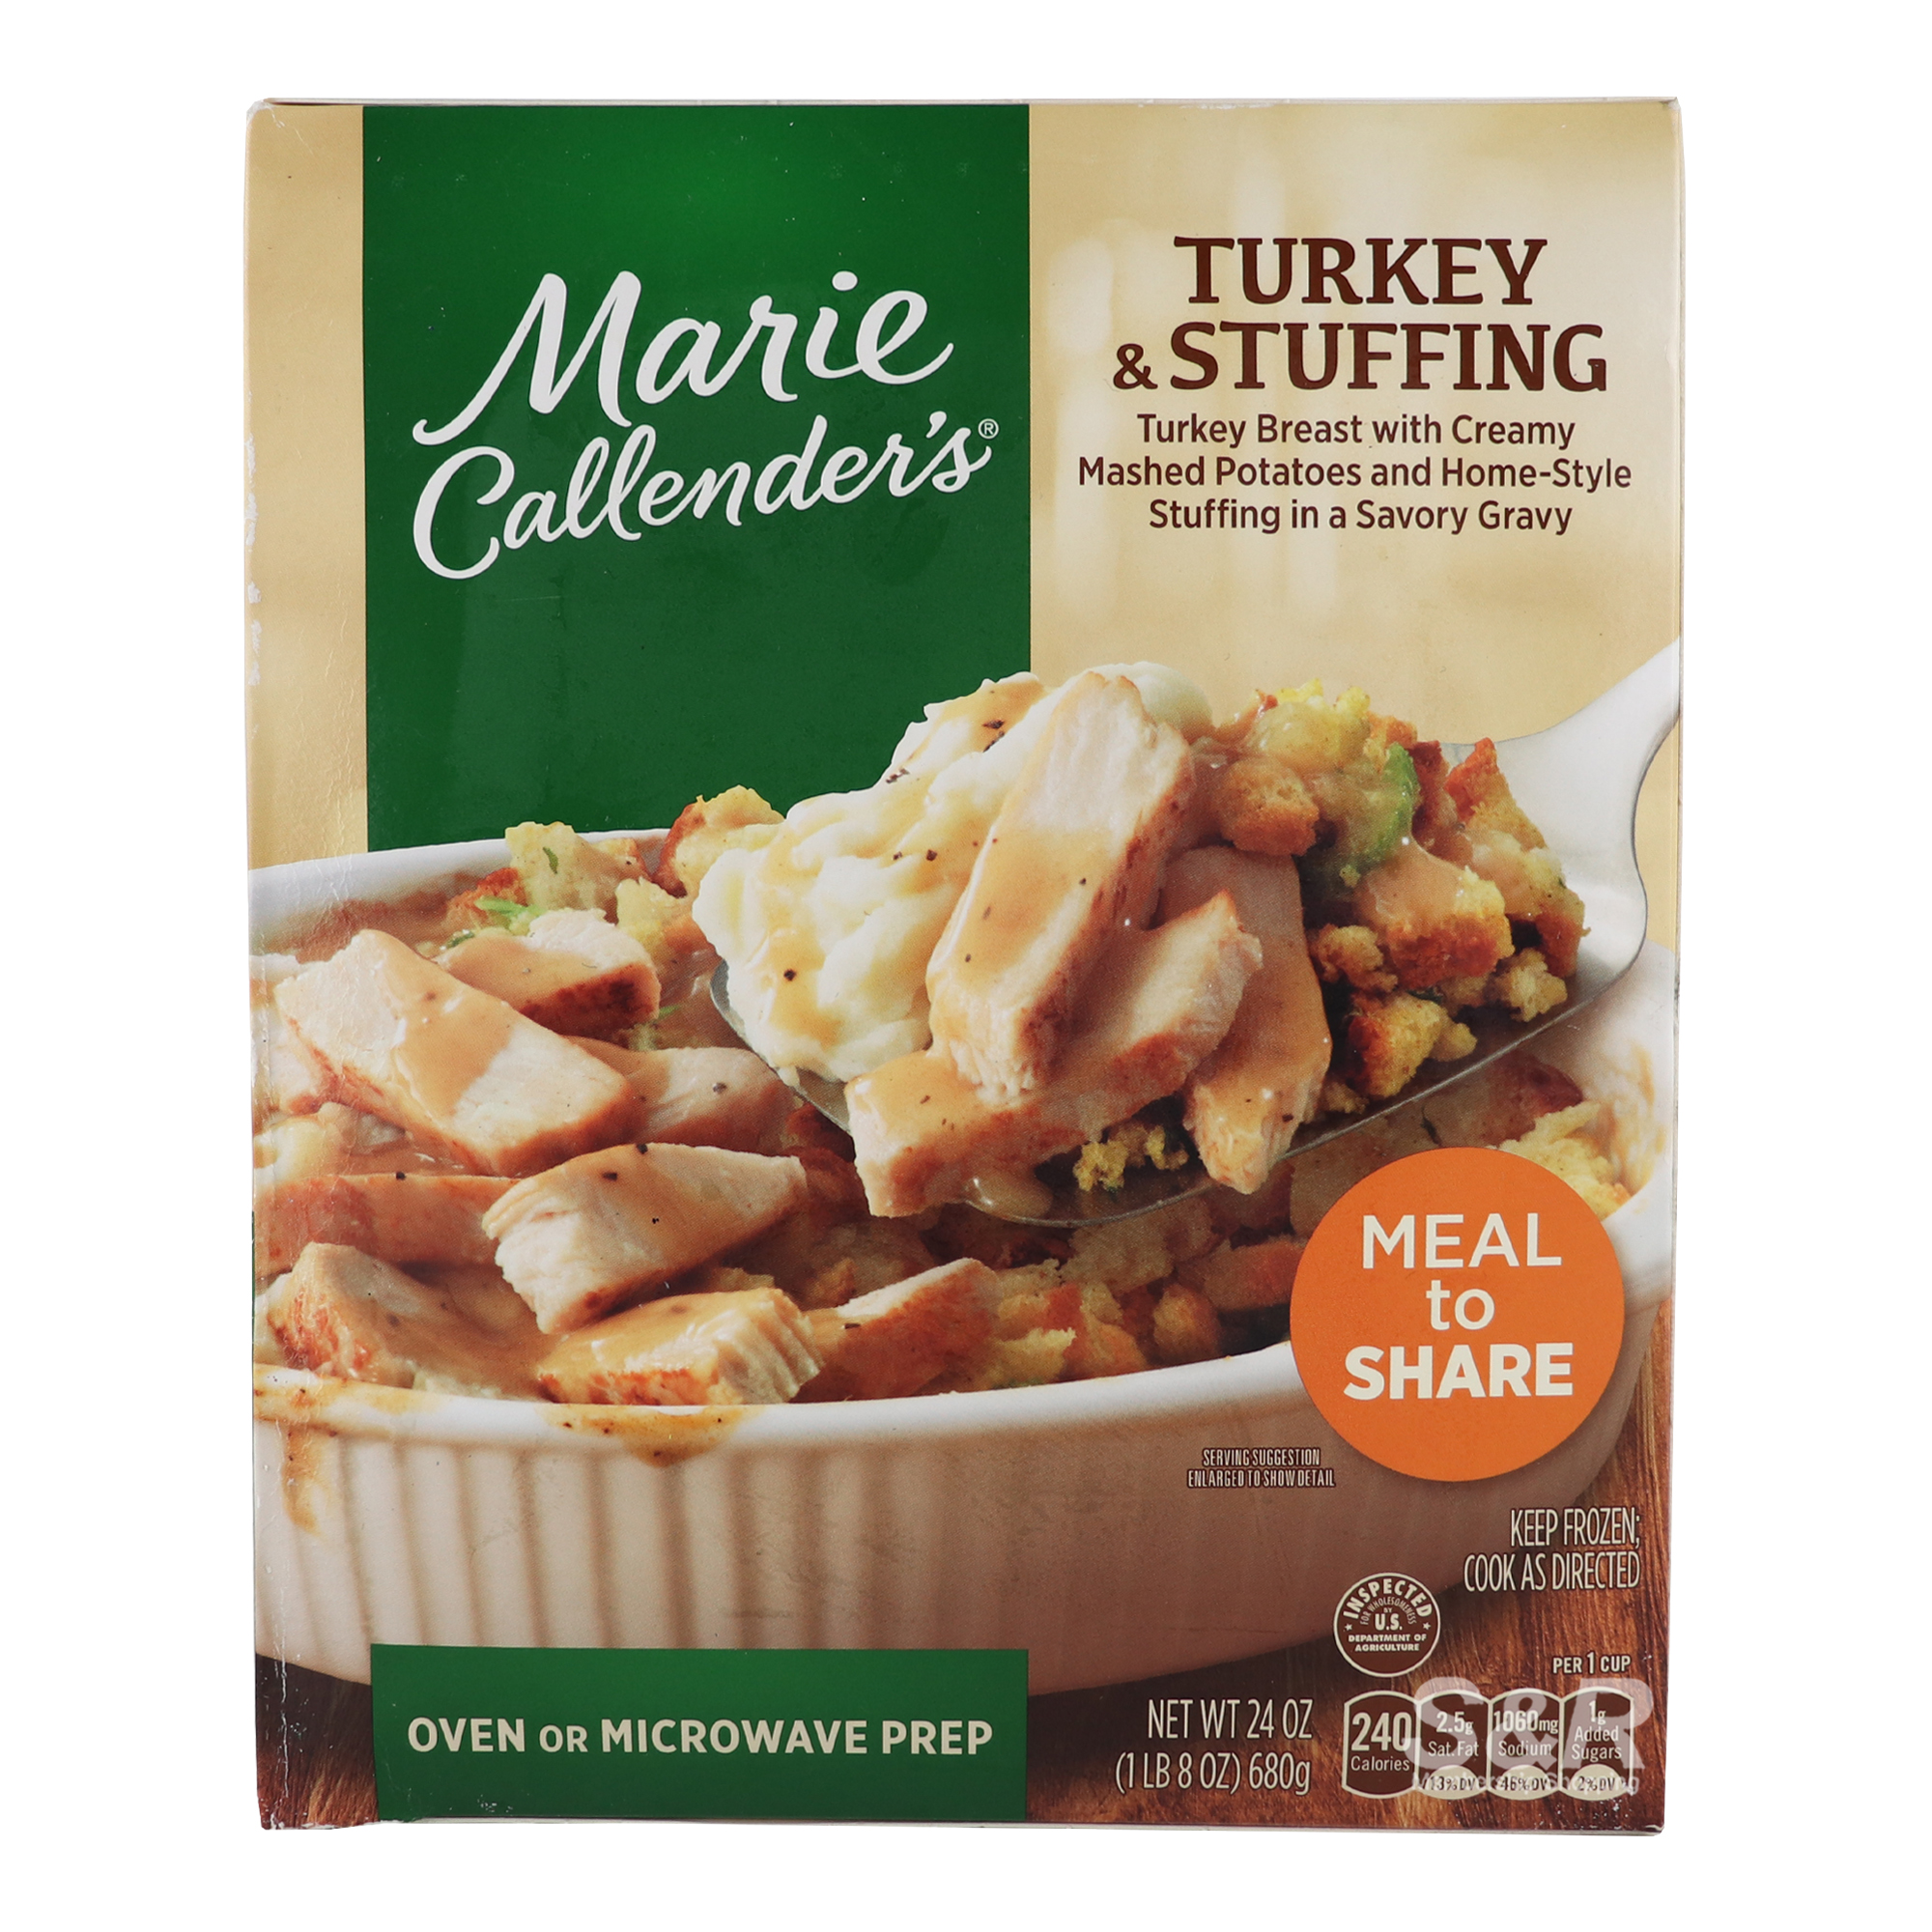 Marie Callender's Turkey and Stuffing 680g